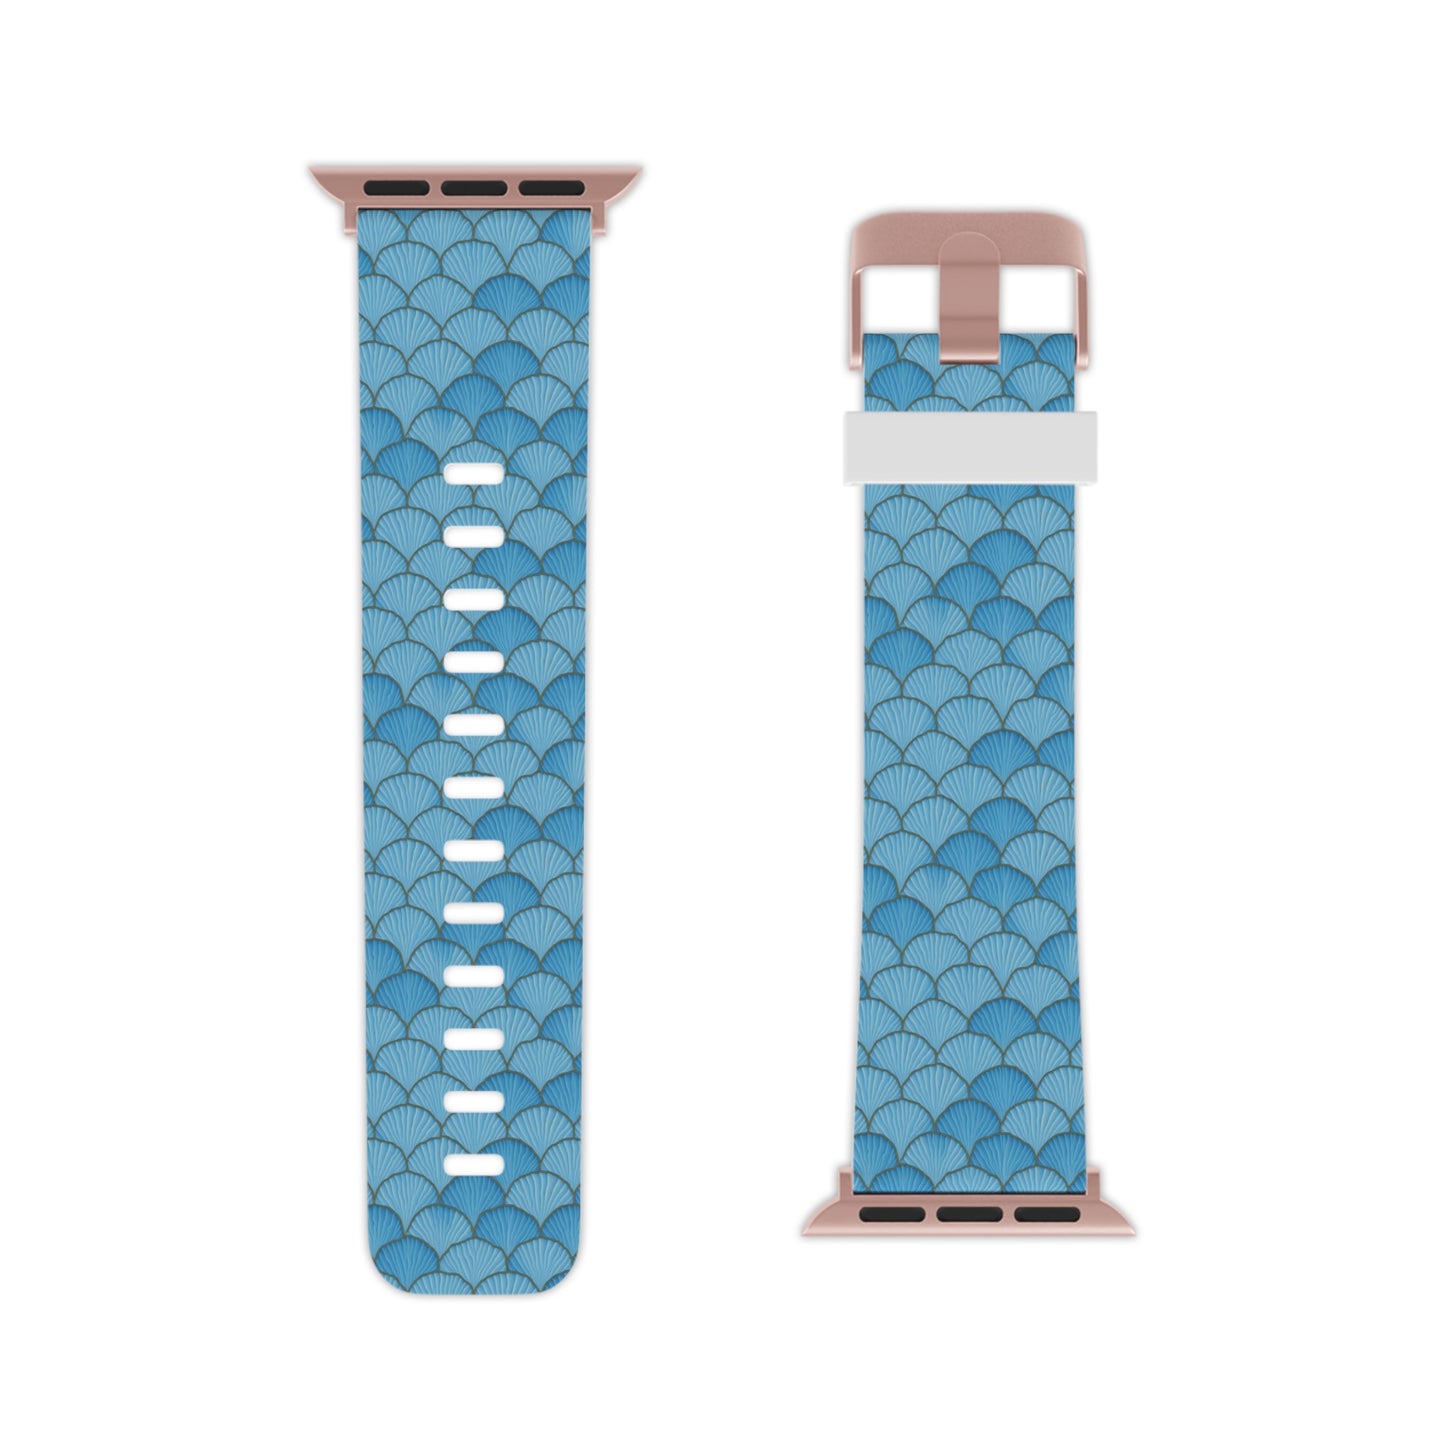 Blue Sea Shell Mermaid Pattern Watch Band for Apple Watch, Great gift for any Ocean Beach or sea life lover!